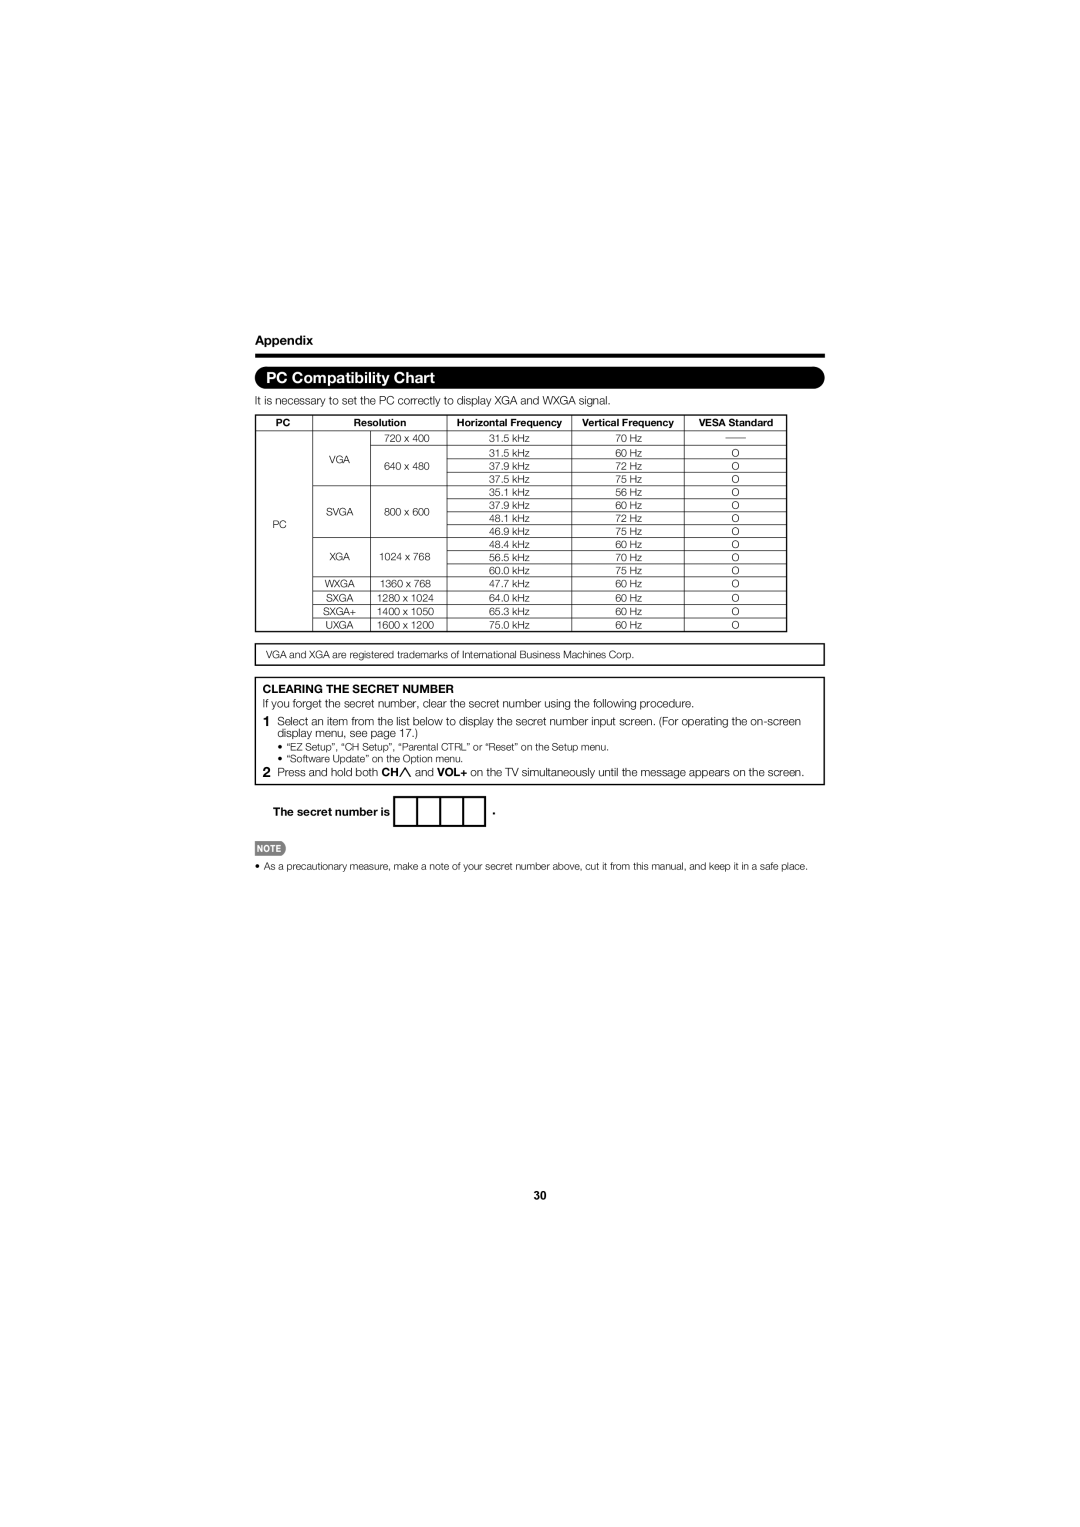 Sharp LC C4067U PC Compatibility Chart, Clearing The Secret Number, The secret number is, Resolution, Horizontal Frequency 